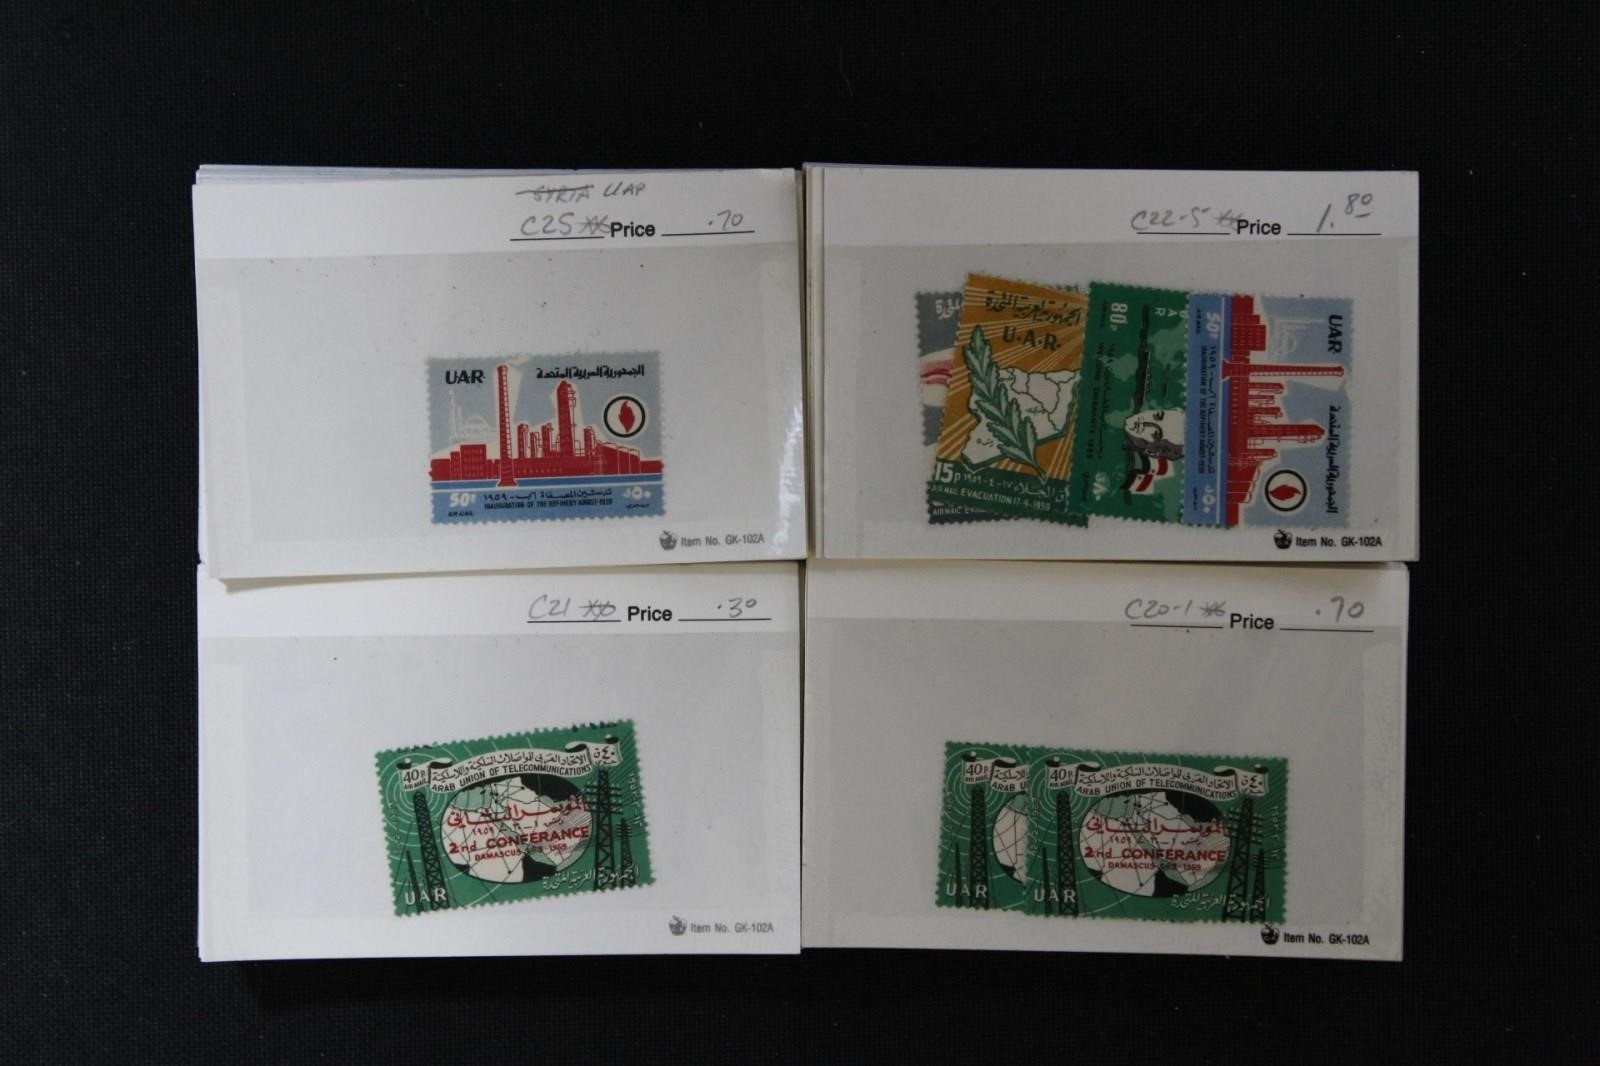 November 8th, 2020 weekly Stamps & Collectibles Auction